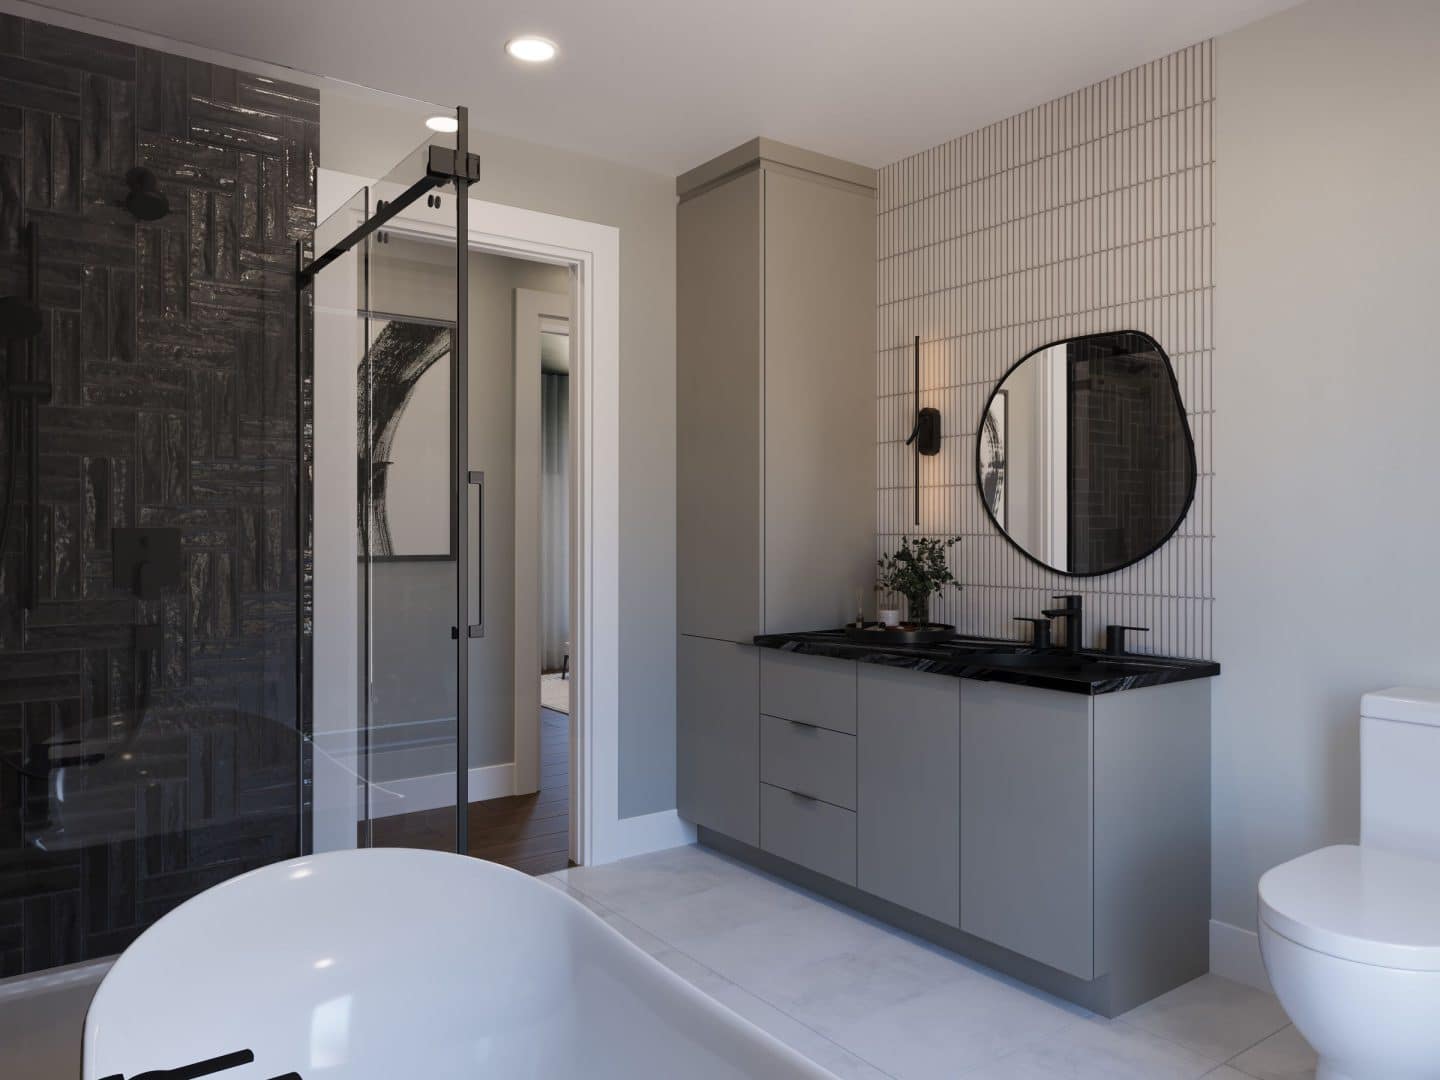 Urbanova model, a single-storey home in the traditional contemporary style. View of the bathroom.